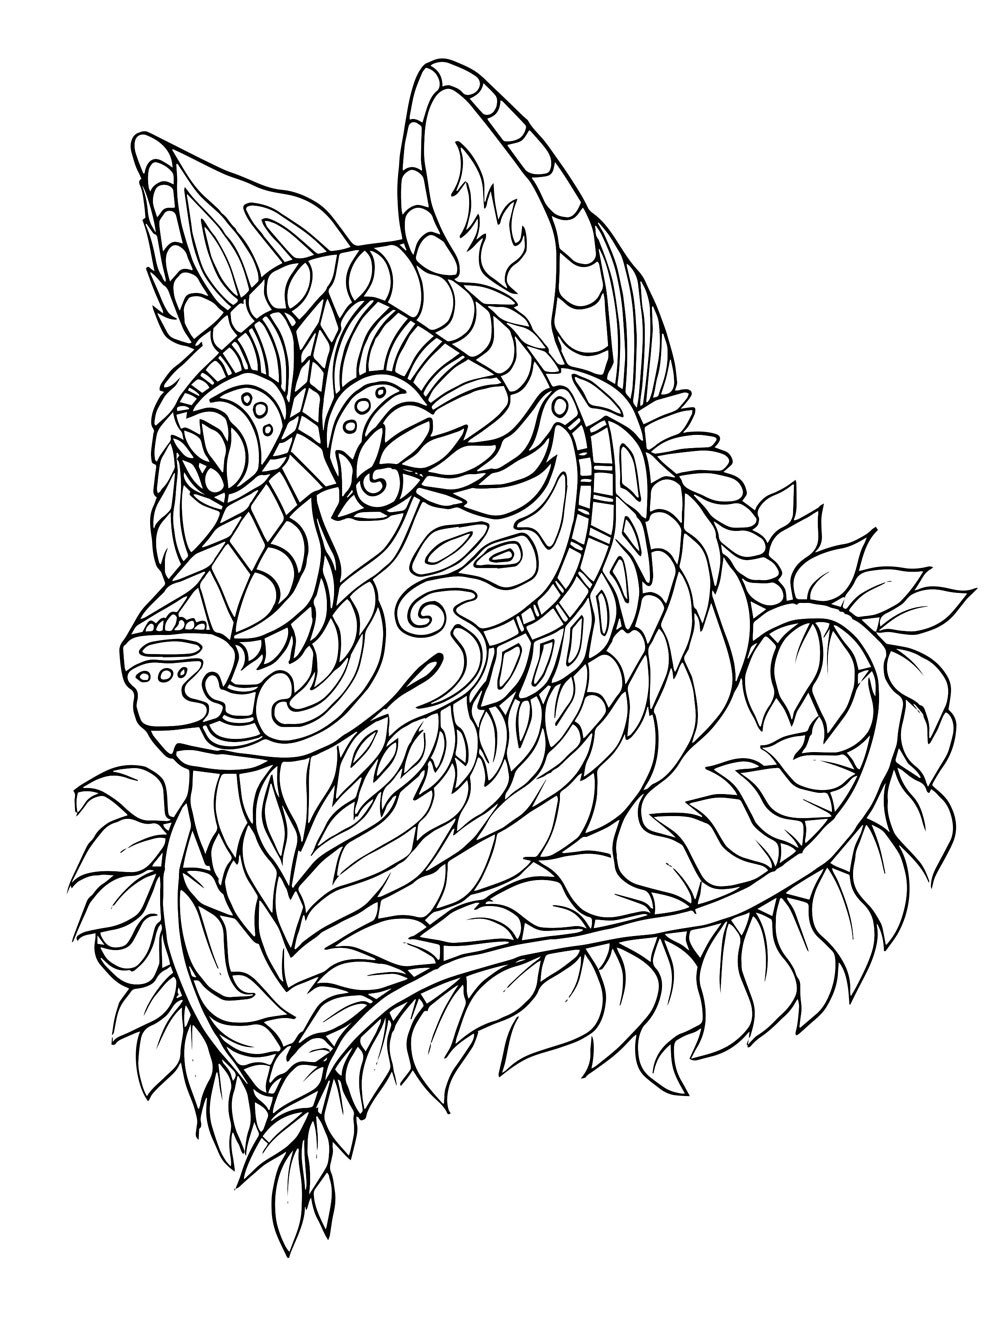 Stress Relief Coloring Pages
 Stress Relief Coloring Pages Animals Free